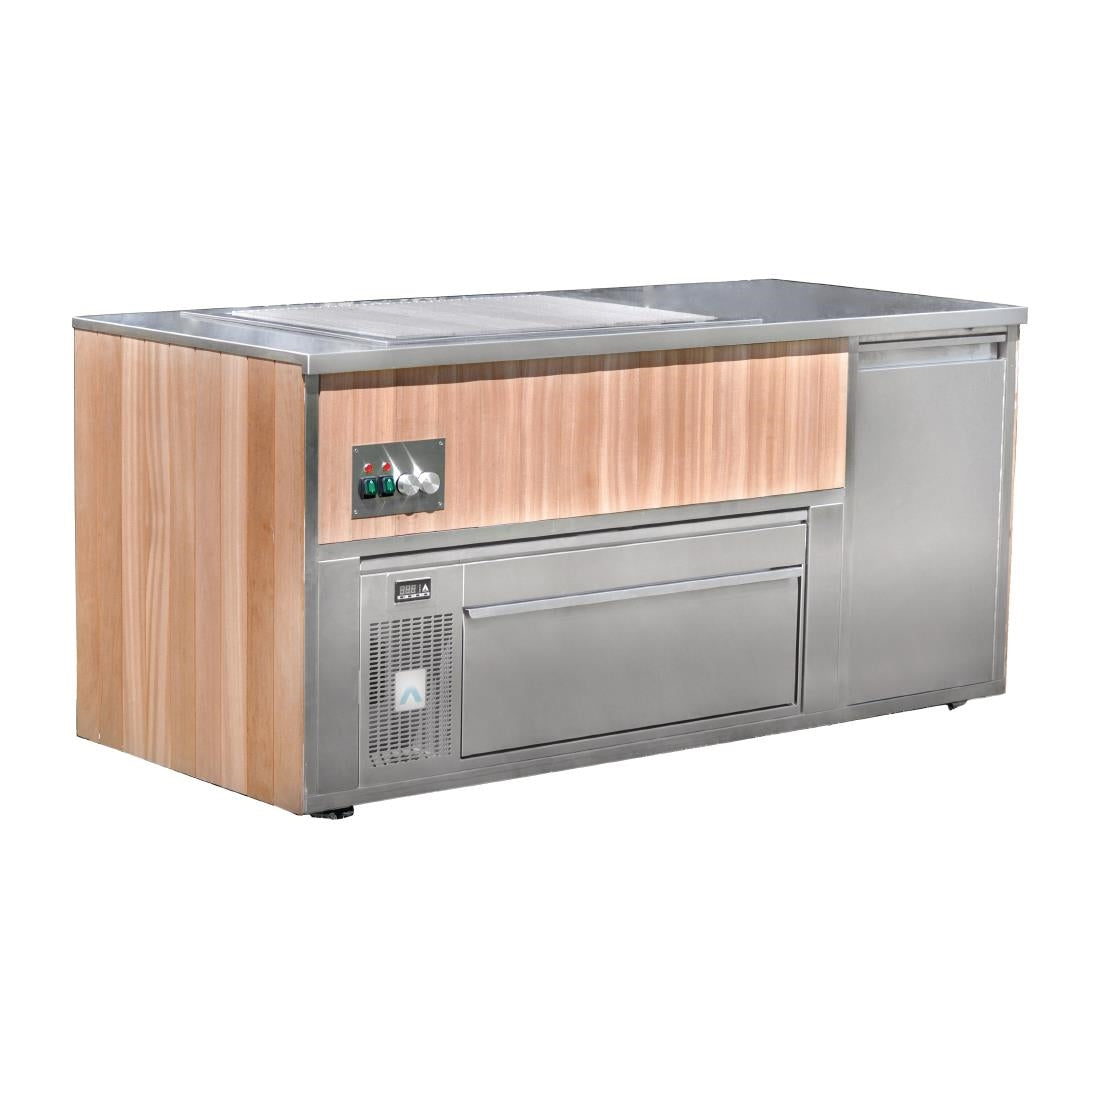 FP451 Synergy Grill Outdoor Cook Station 900 with Adande Drawer Fridge